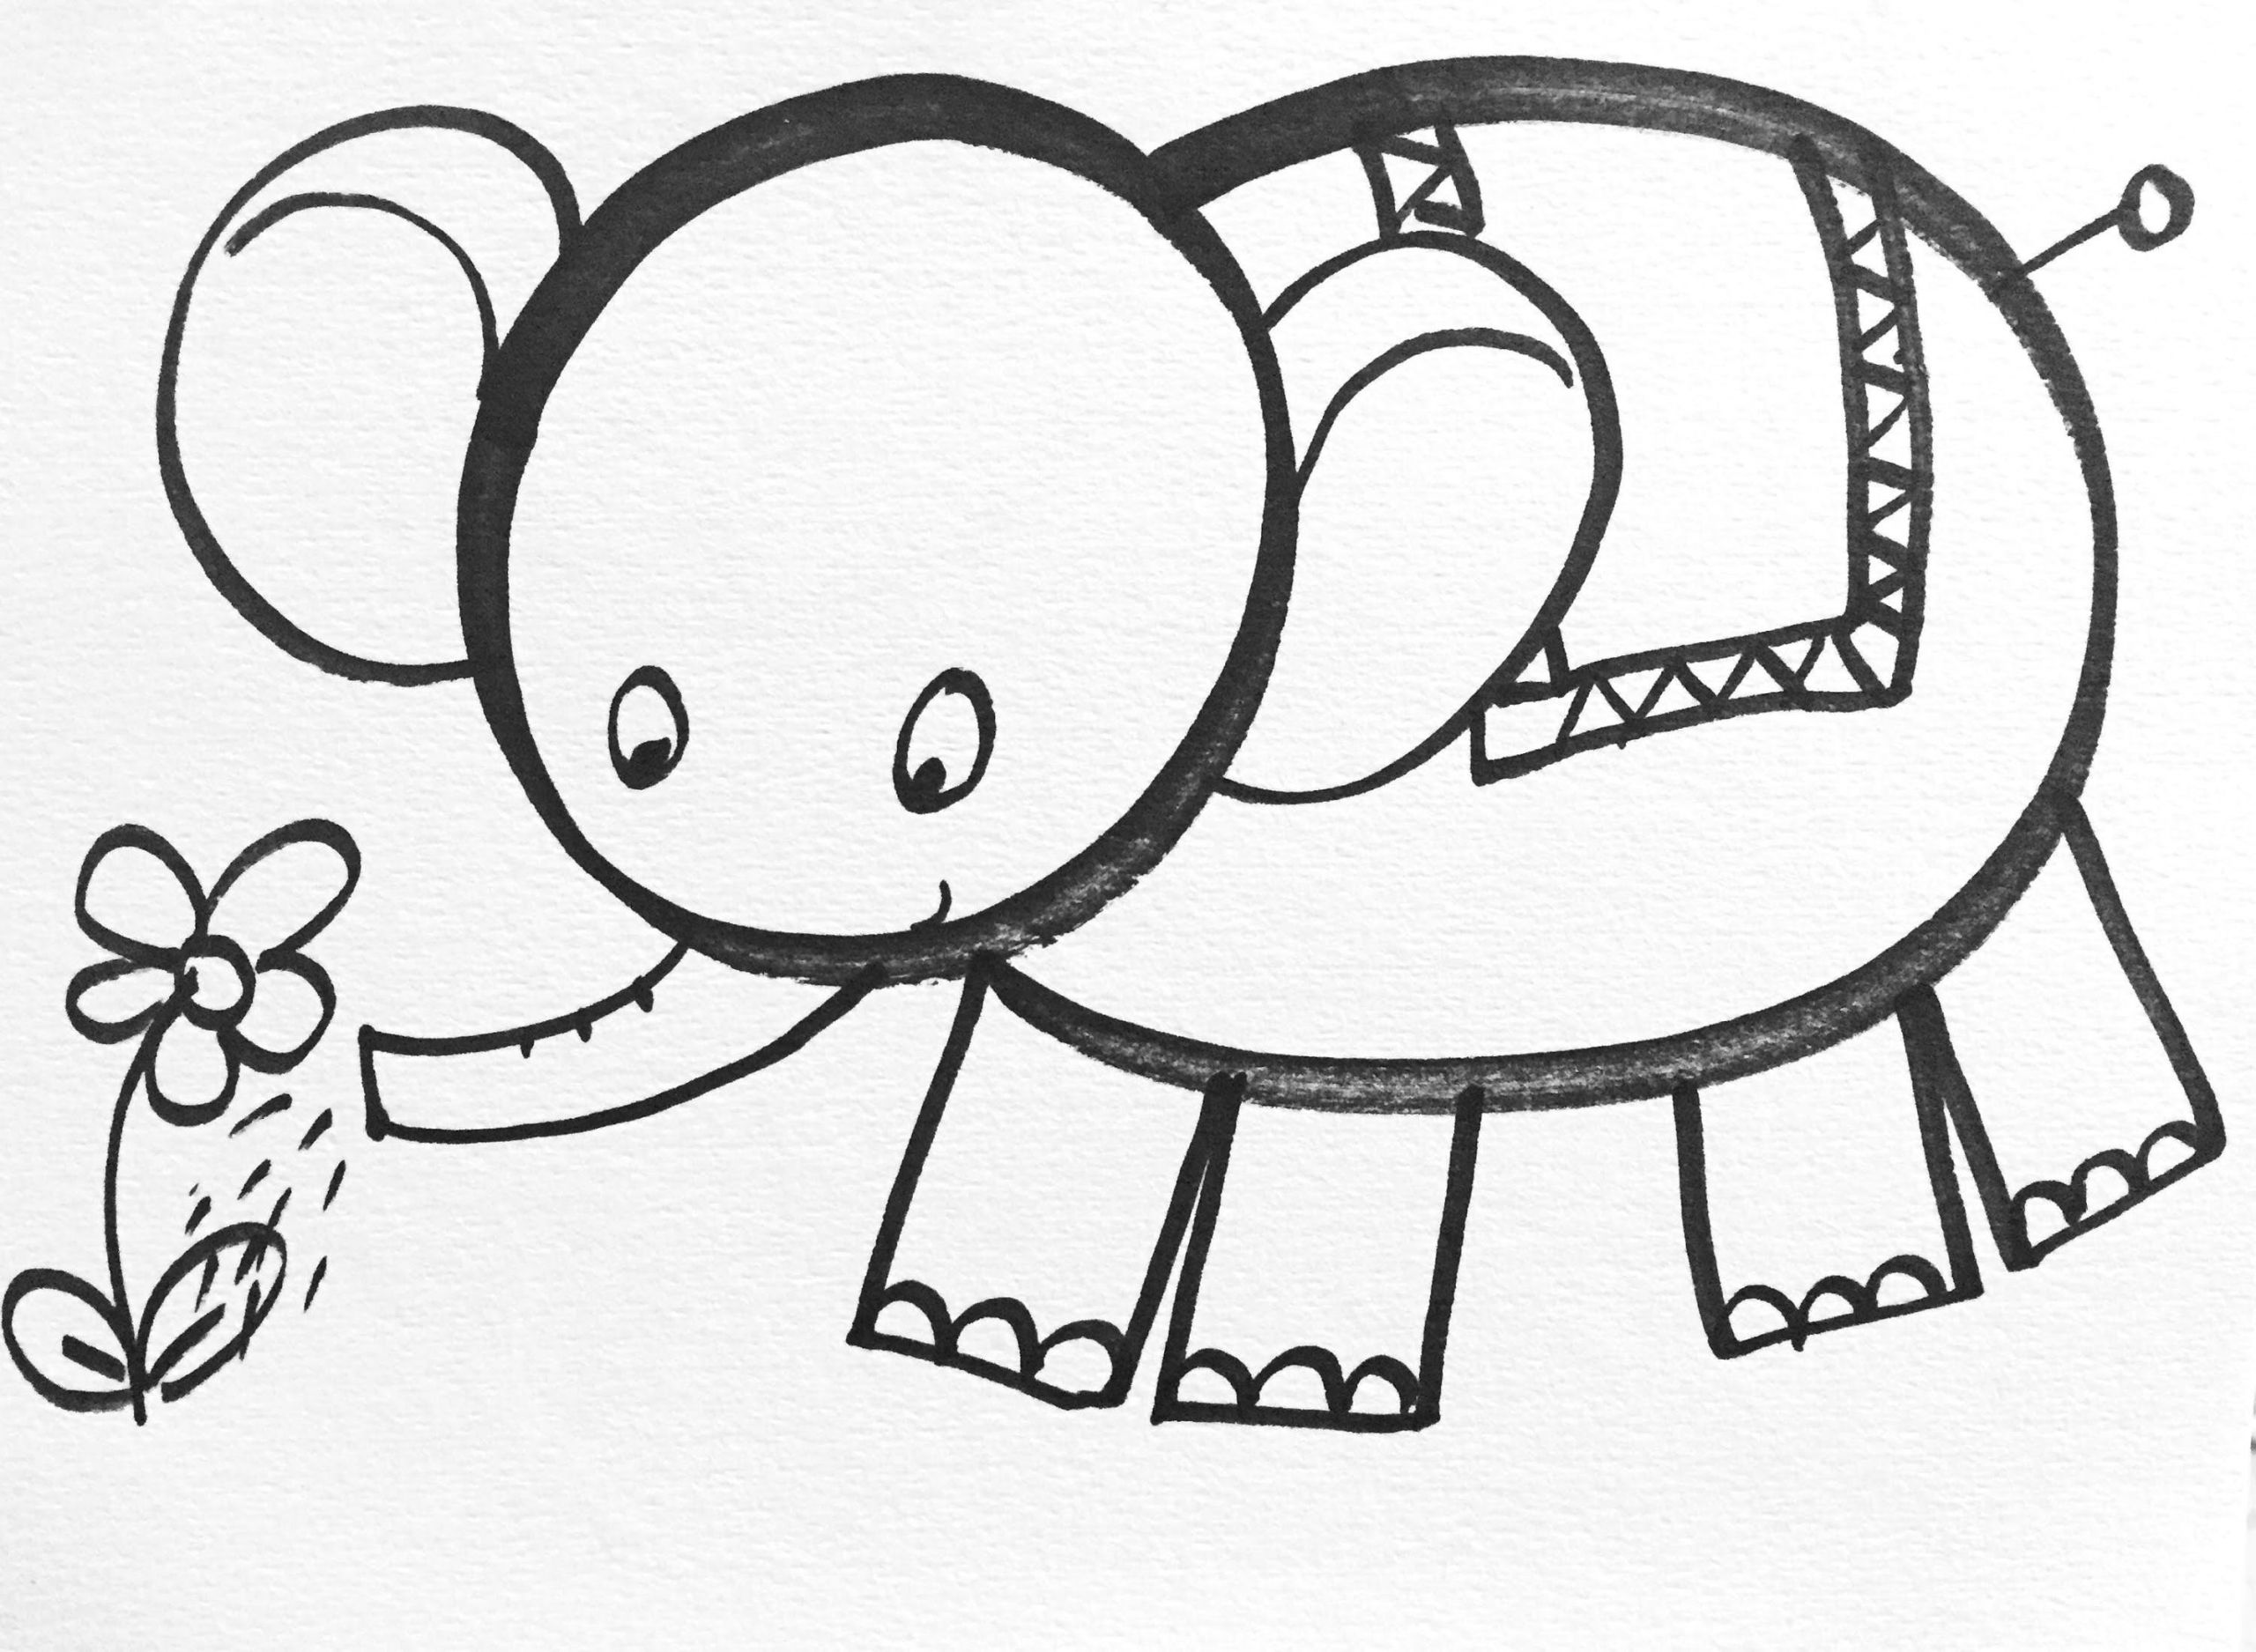 How to Draw An Elephant Step by Step Easy Learn How to Draw Easy In This Drawing You Can Learn to